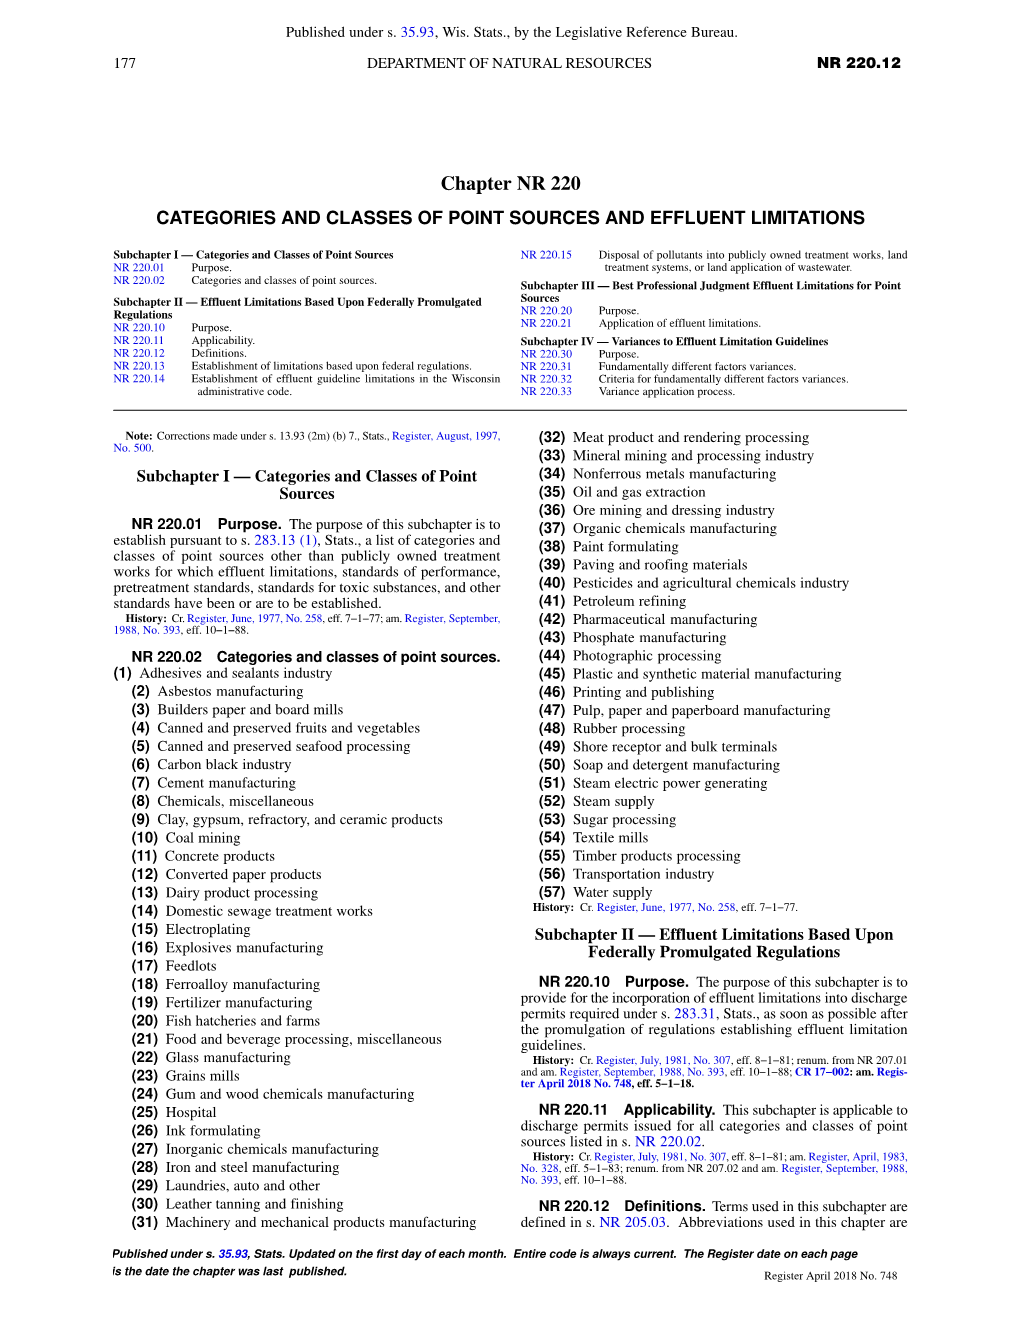 Chapter NR 220 CATEGORIES and CLASSES of POINT SOURCES and EFFLUENT LIMITATIONS